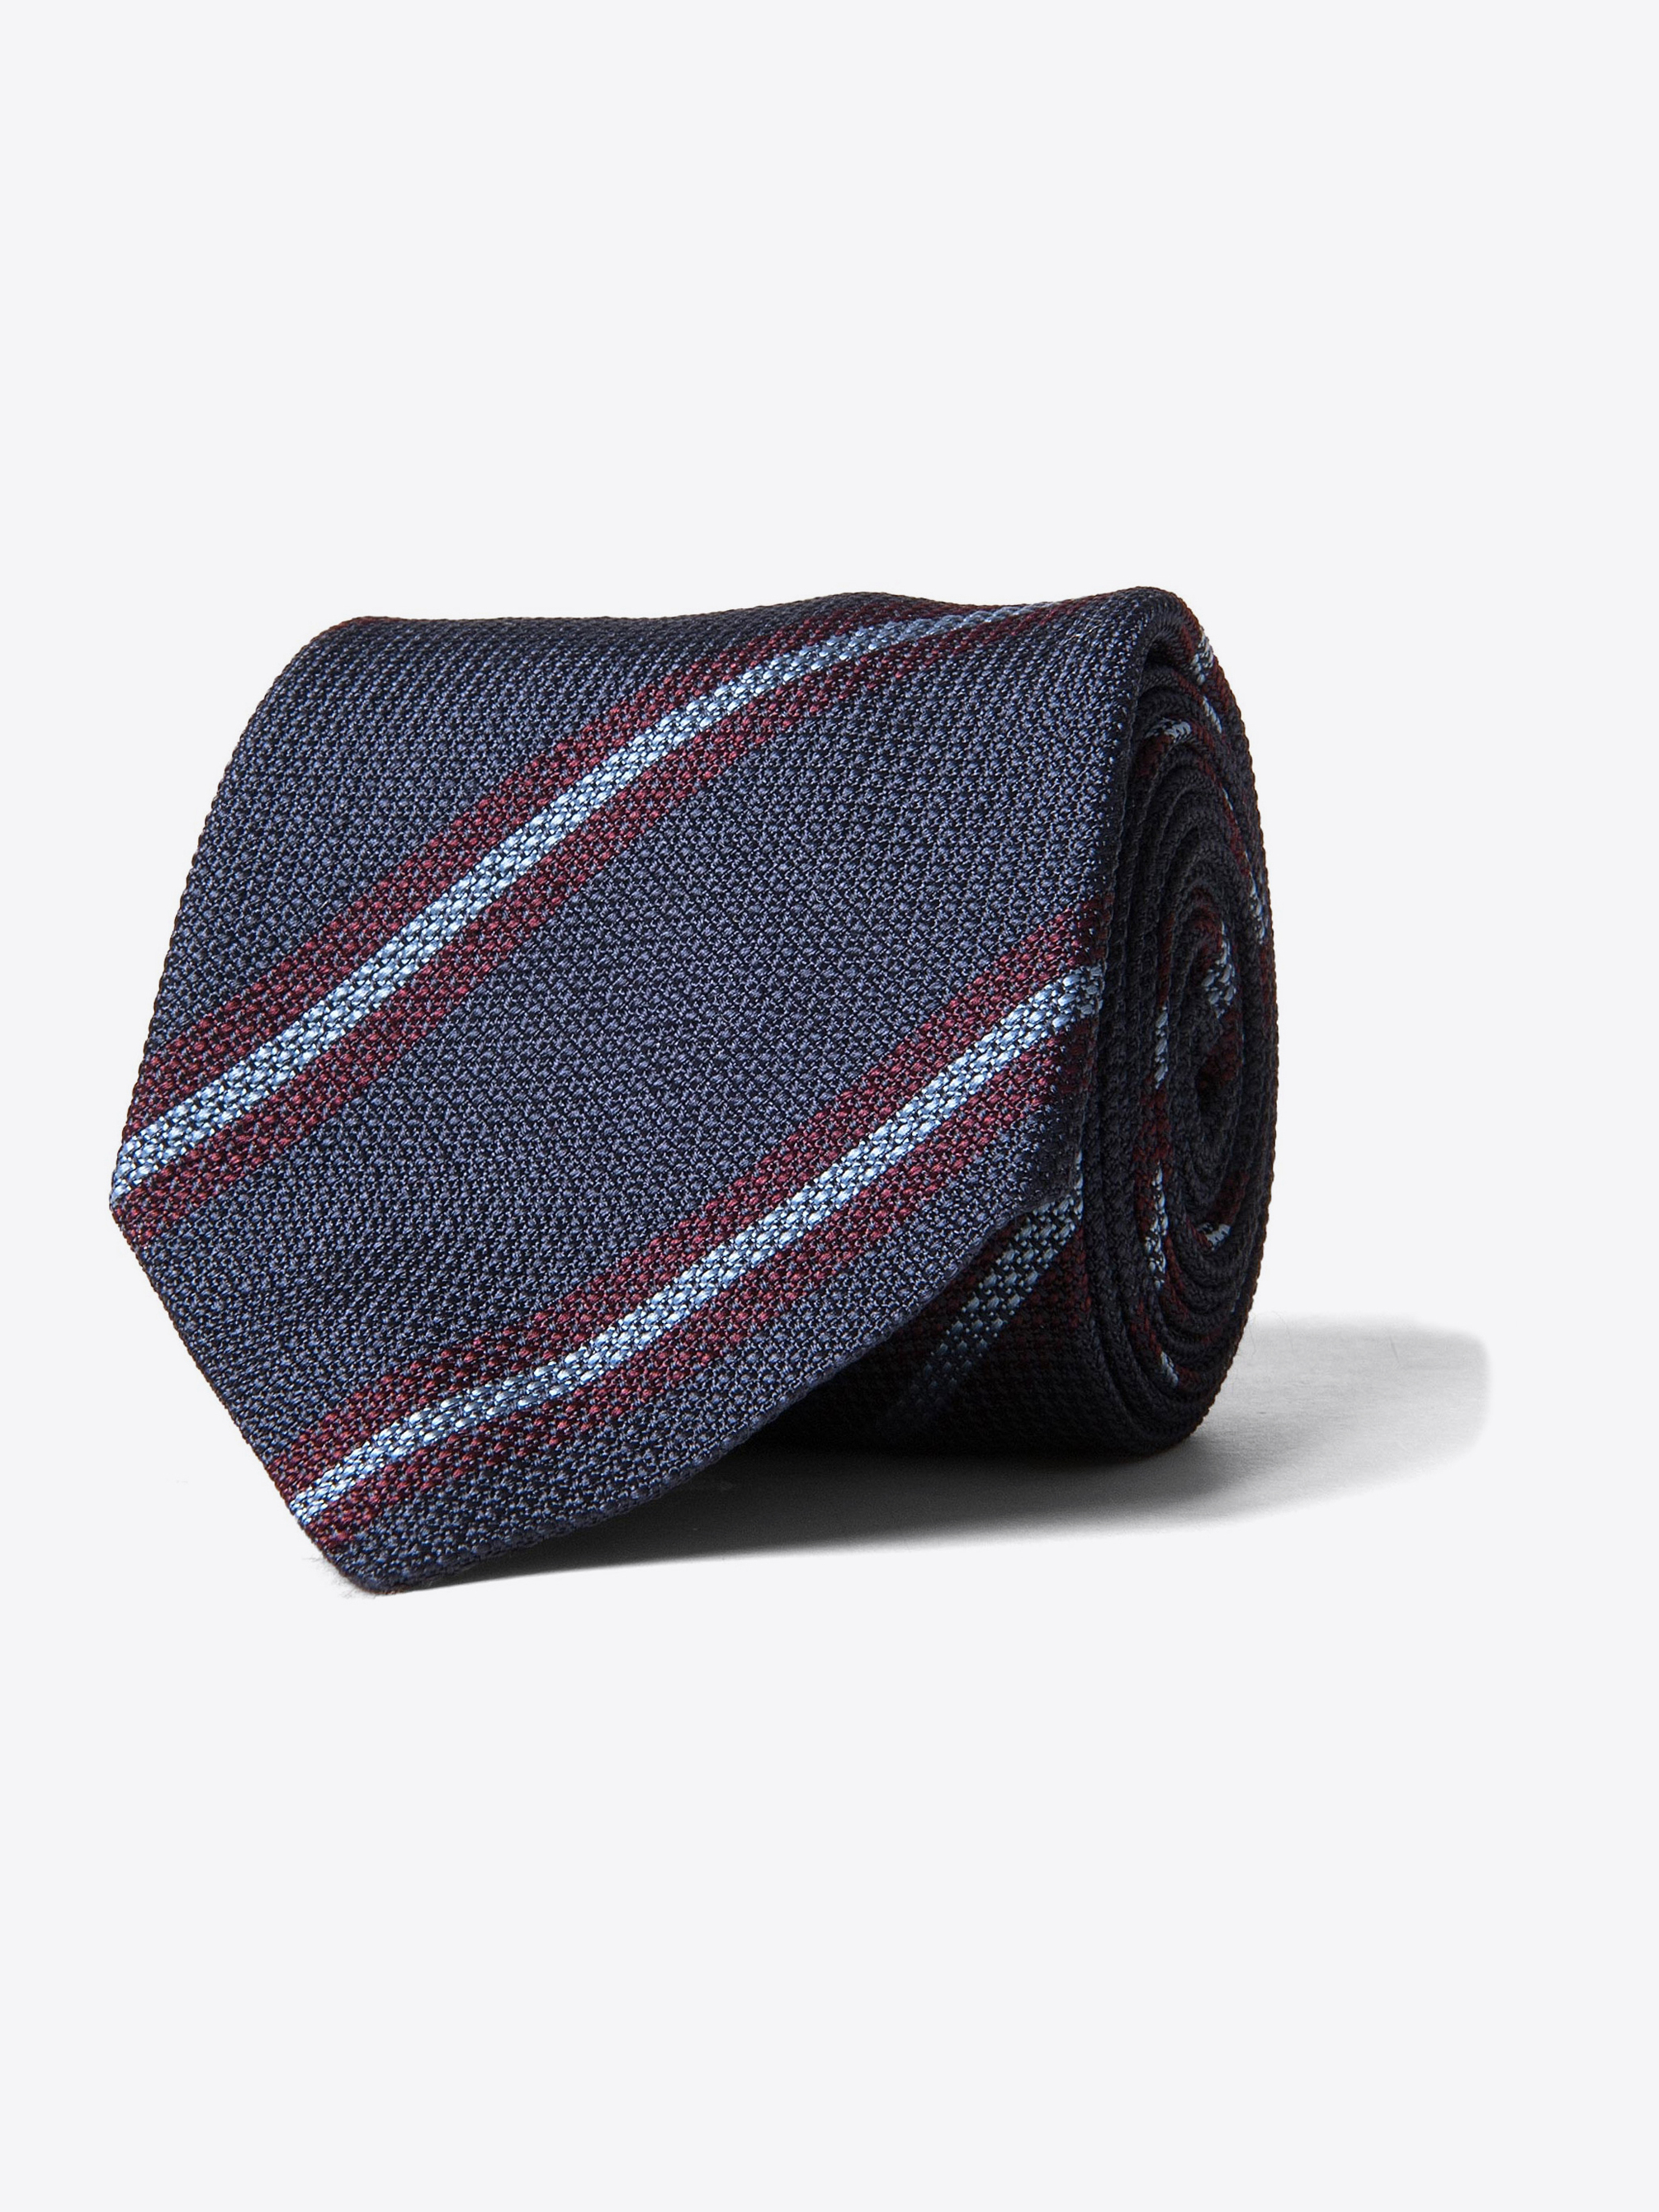 Zoom Image of Navy Red and Light Blue Striped Silk Grenadine Tie